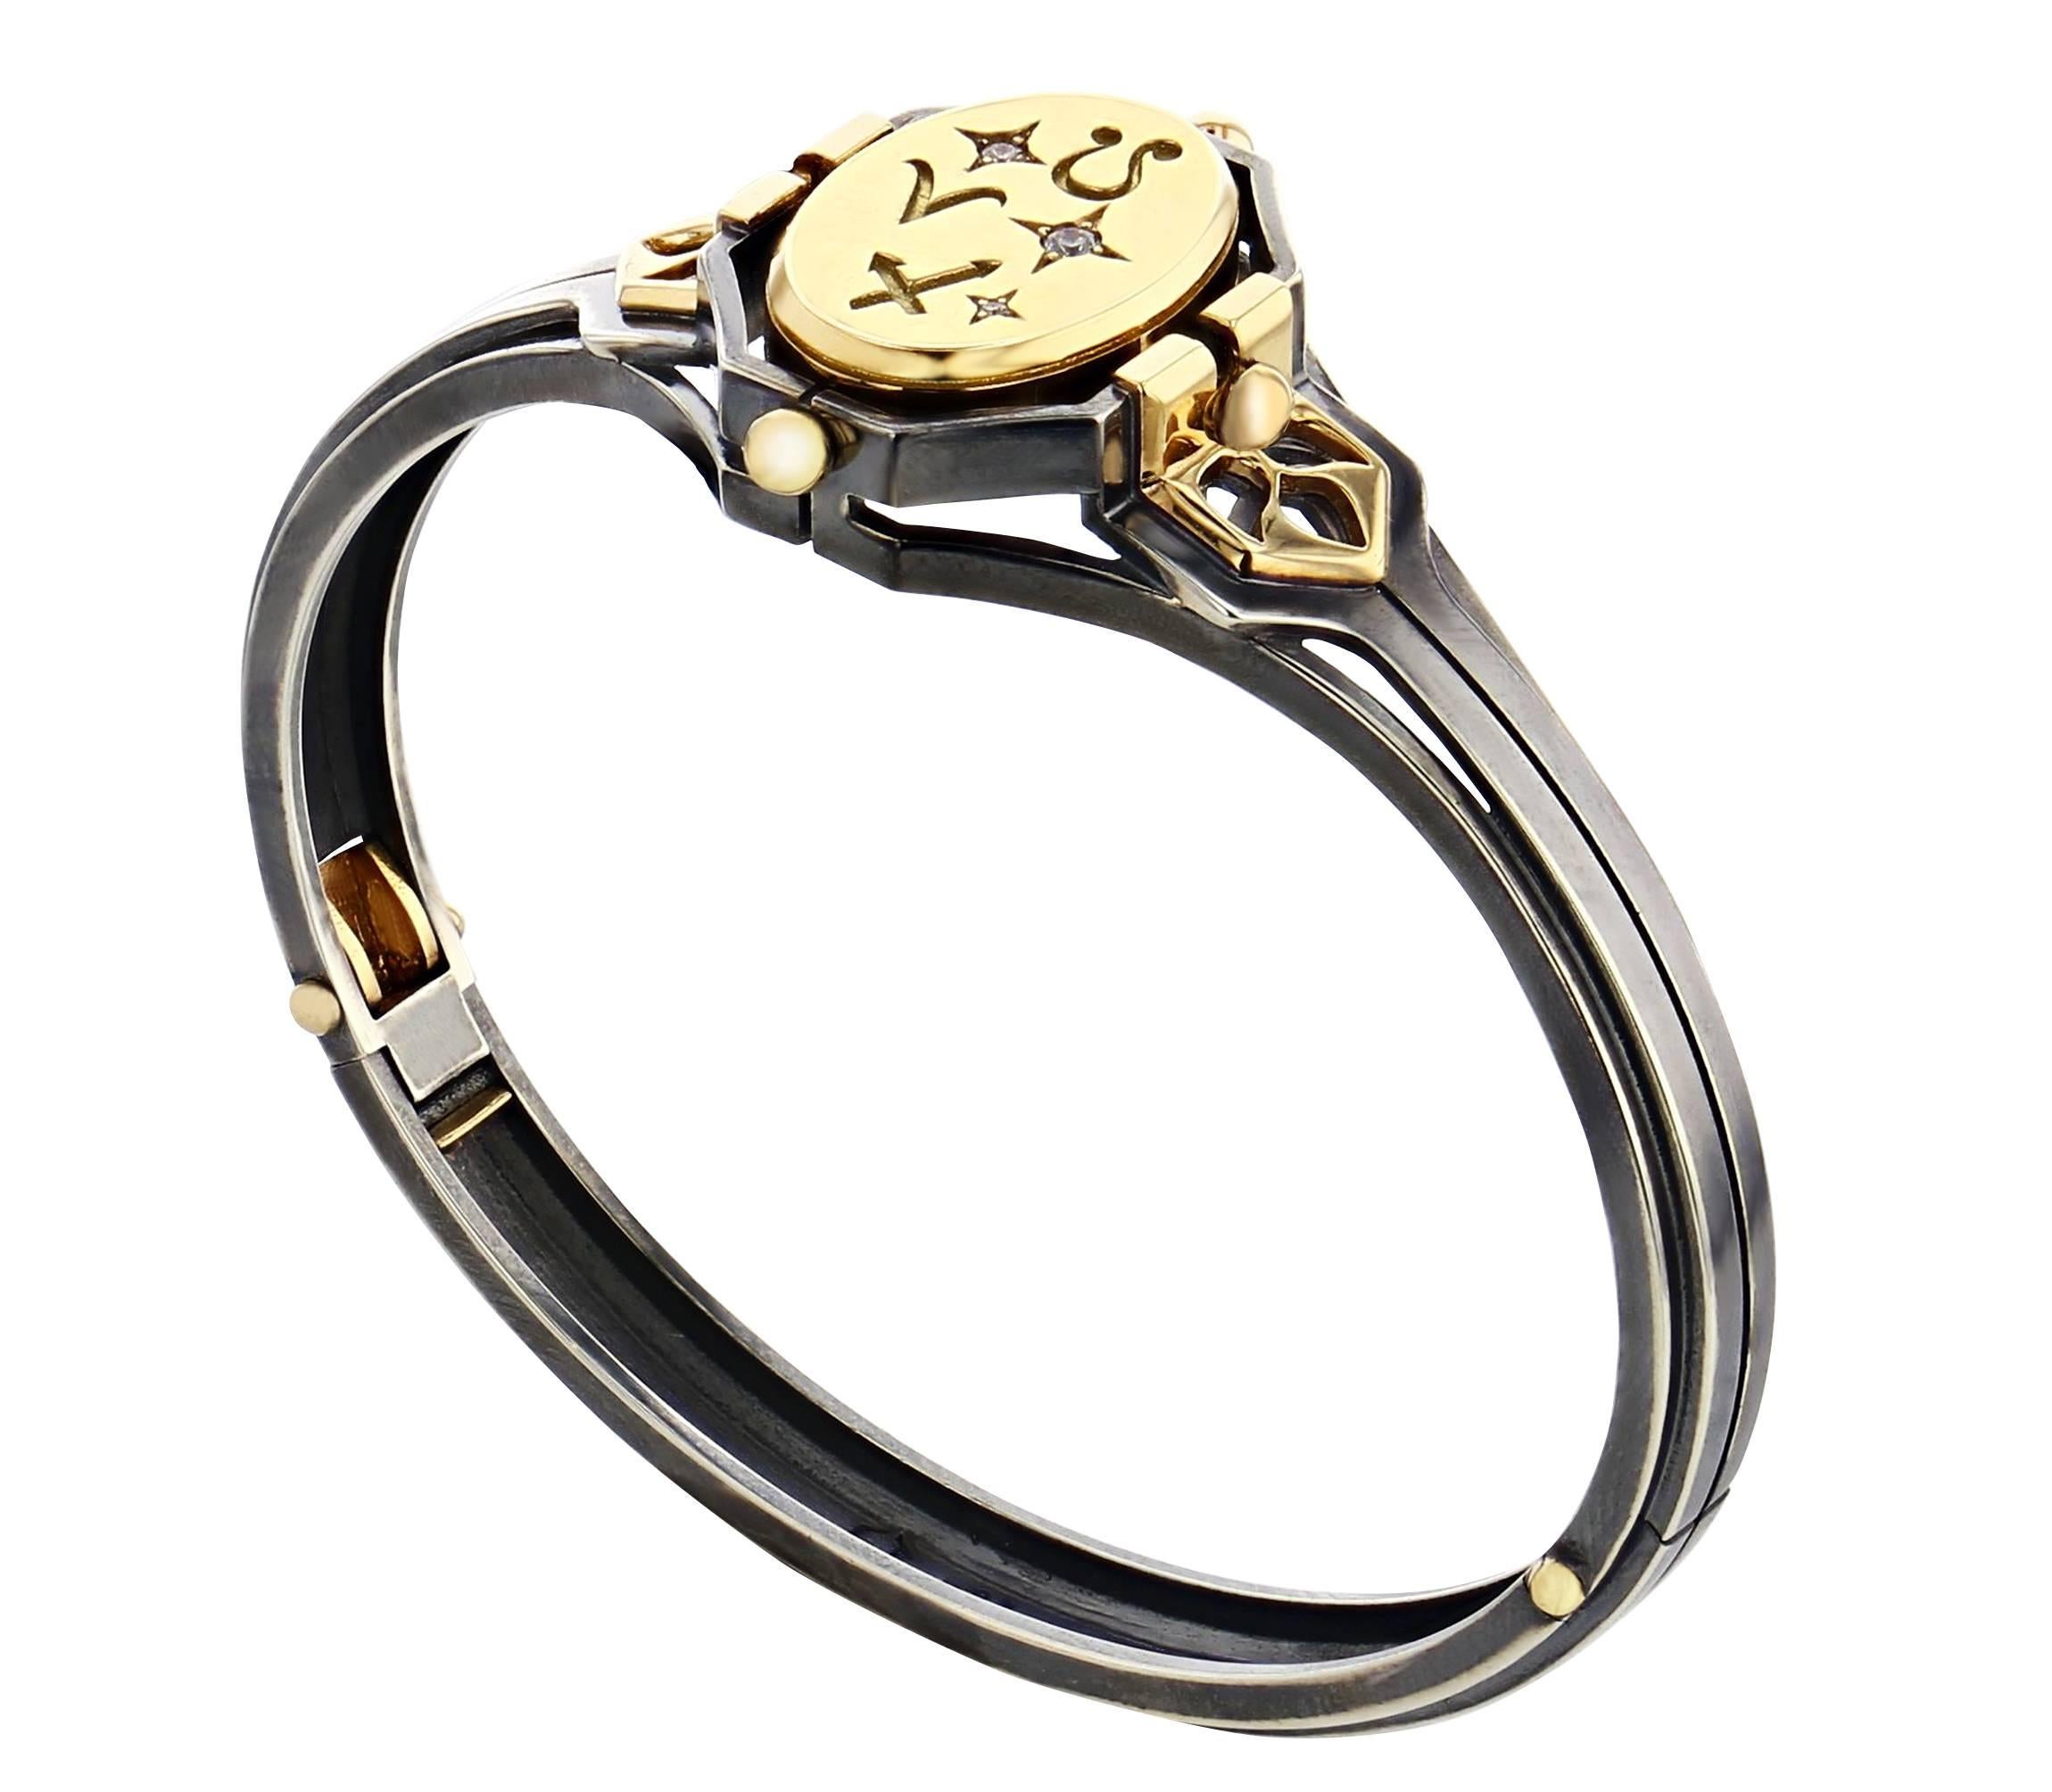 Bangle FEU 
Silver Yellow Gold and Diamond bangle with rotating onyx center piece. 

Patinated silver and gold Bangle. The pivoting central medallion is in gold engraved with zodiac signs and accentuated with set, star-shaped diamonds on one side,